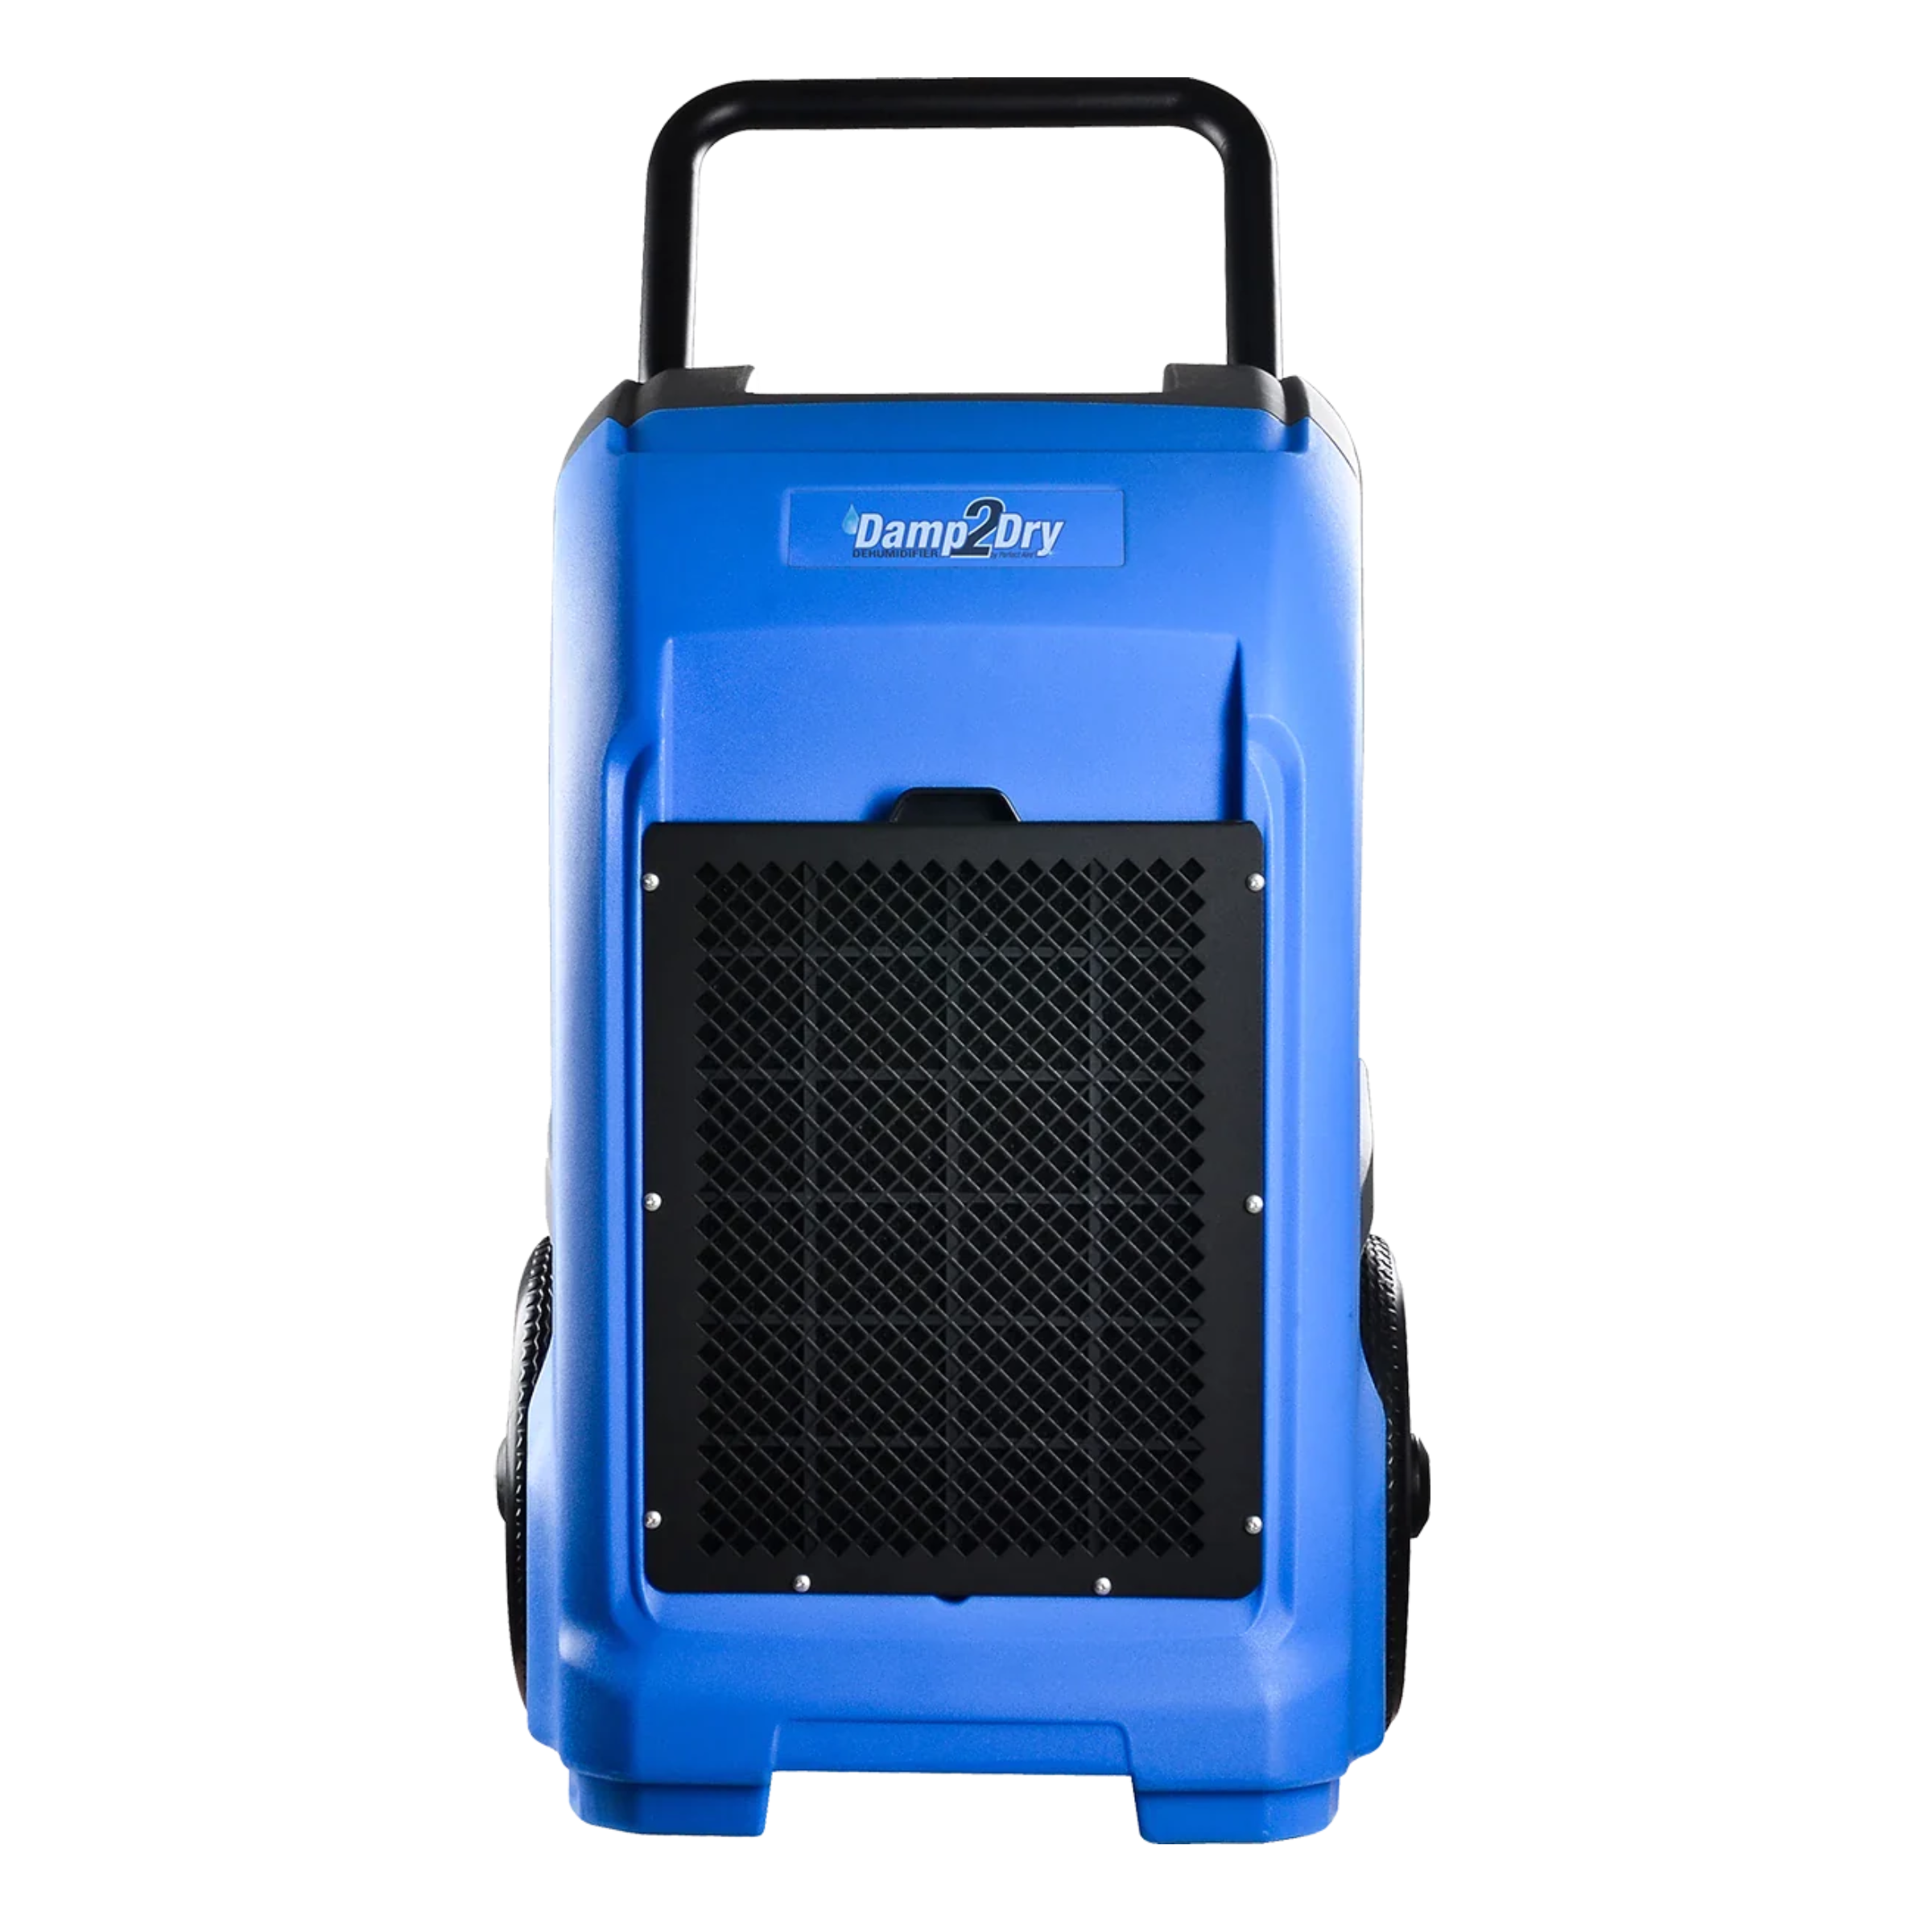 PerfectAire-Commercial Dehumidifier-1PACD150, Damp2Dry 65 Liter/150 Pint Commercial Dehumidifier, Built-In Pump